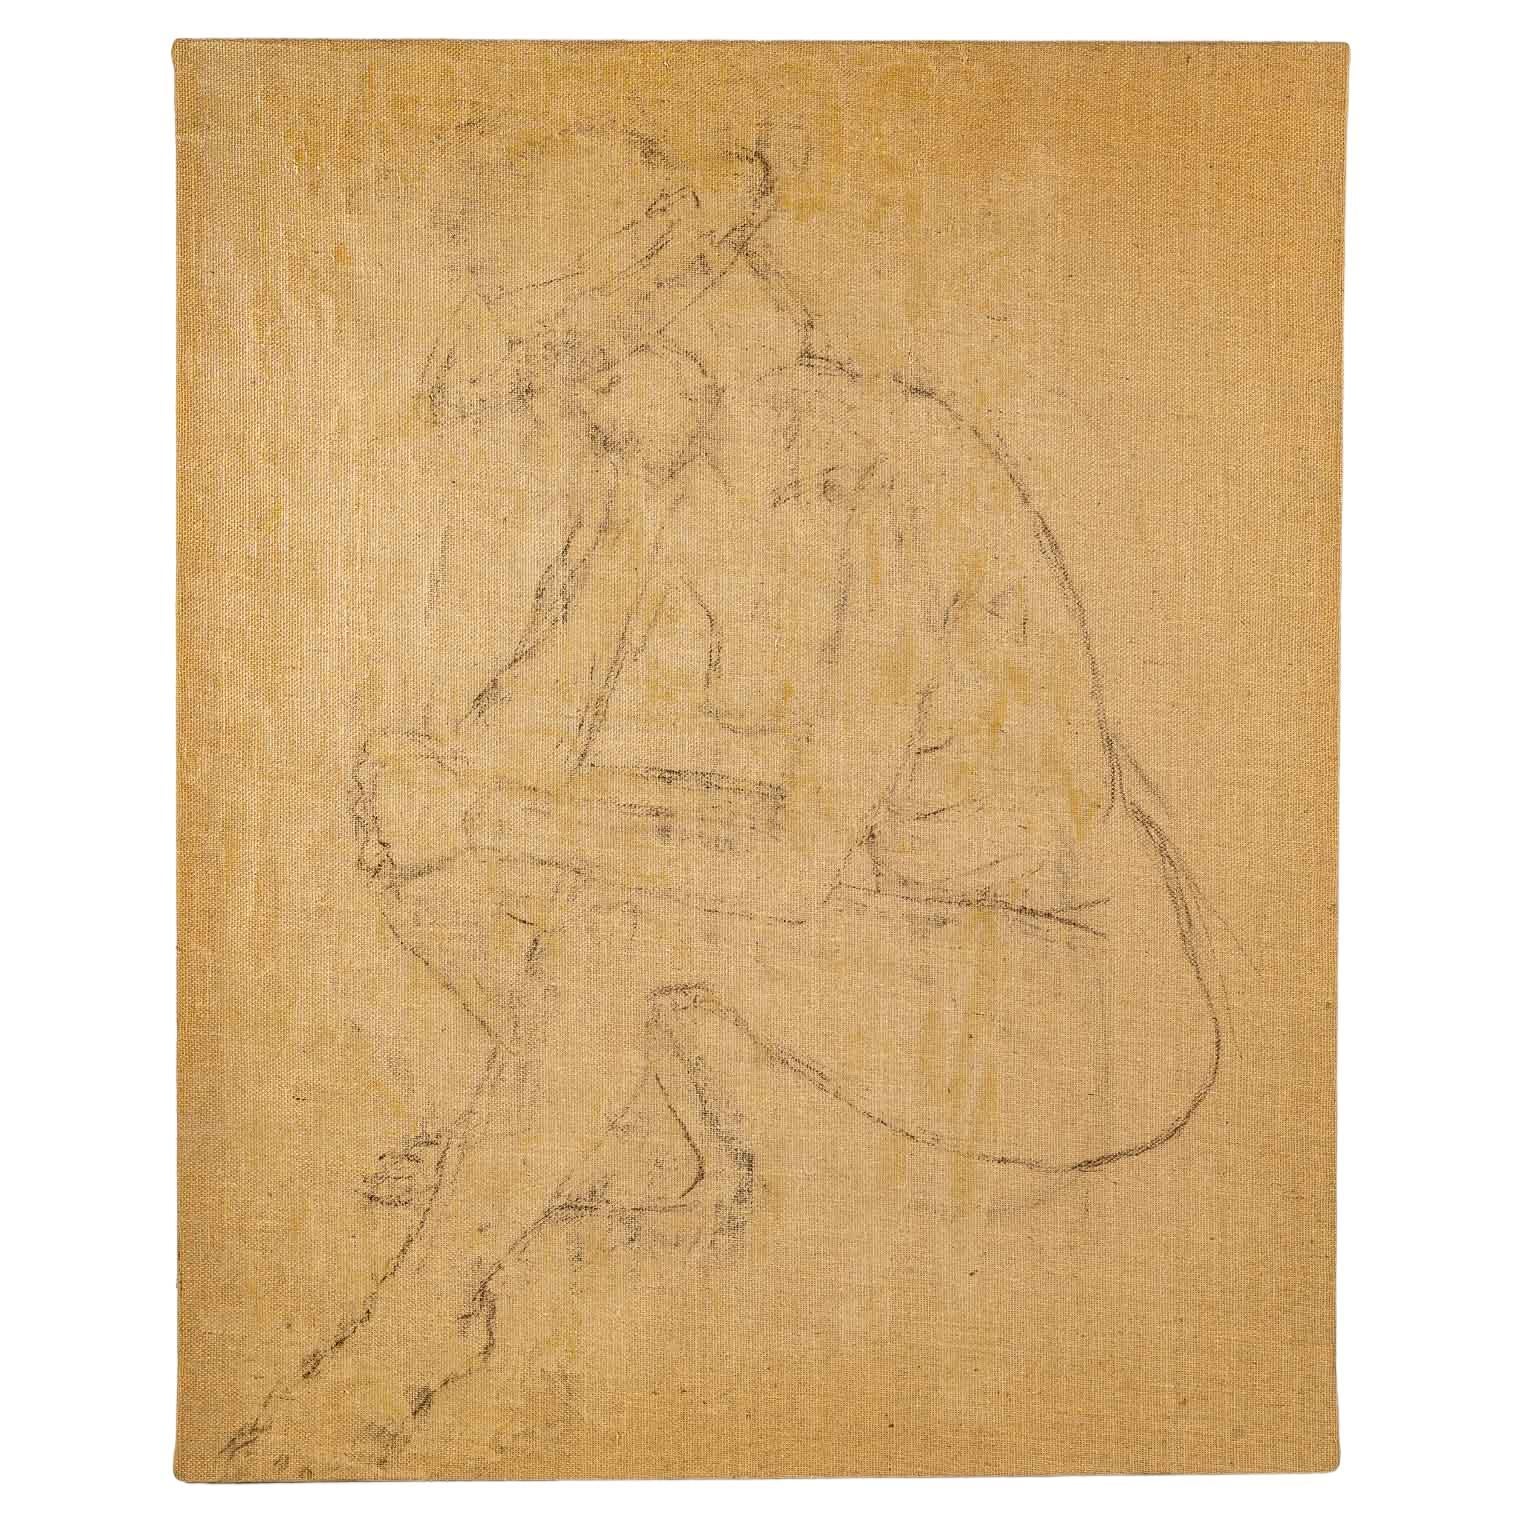 Drawing in Transparency, 20th Century